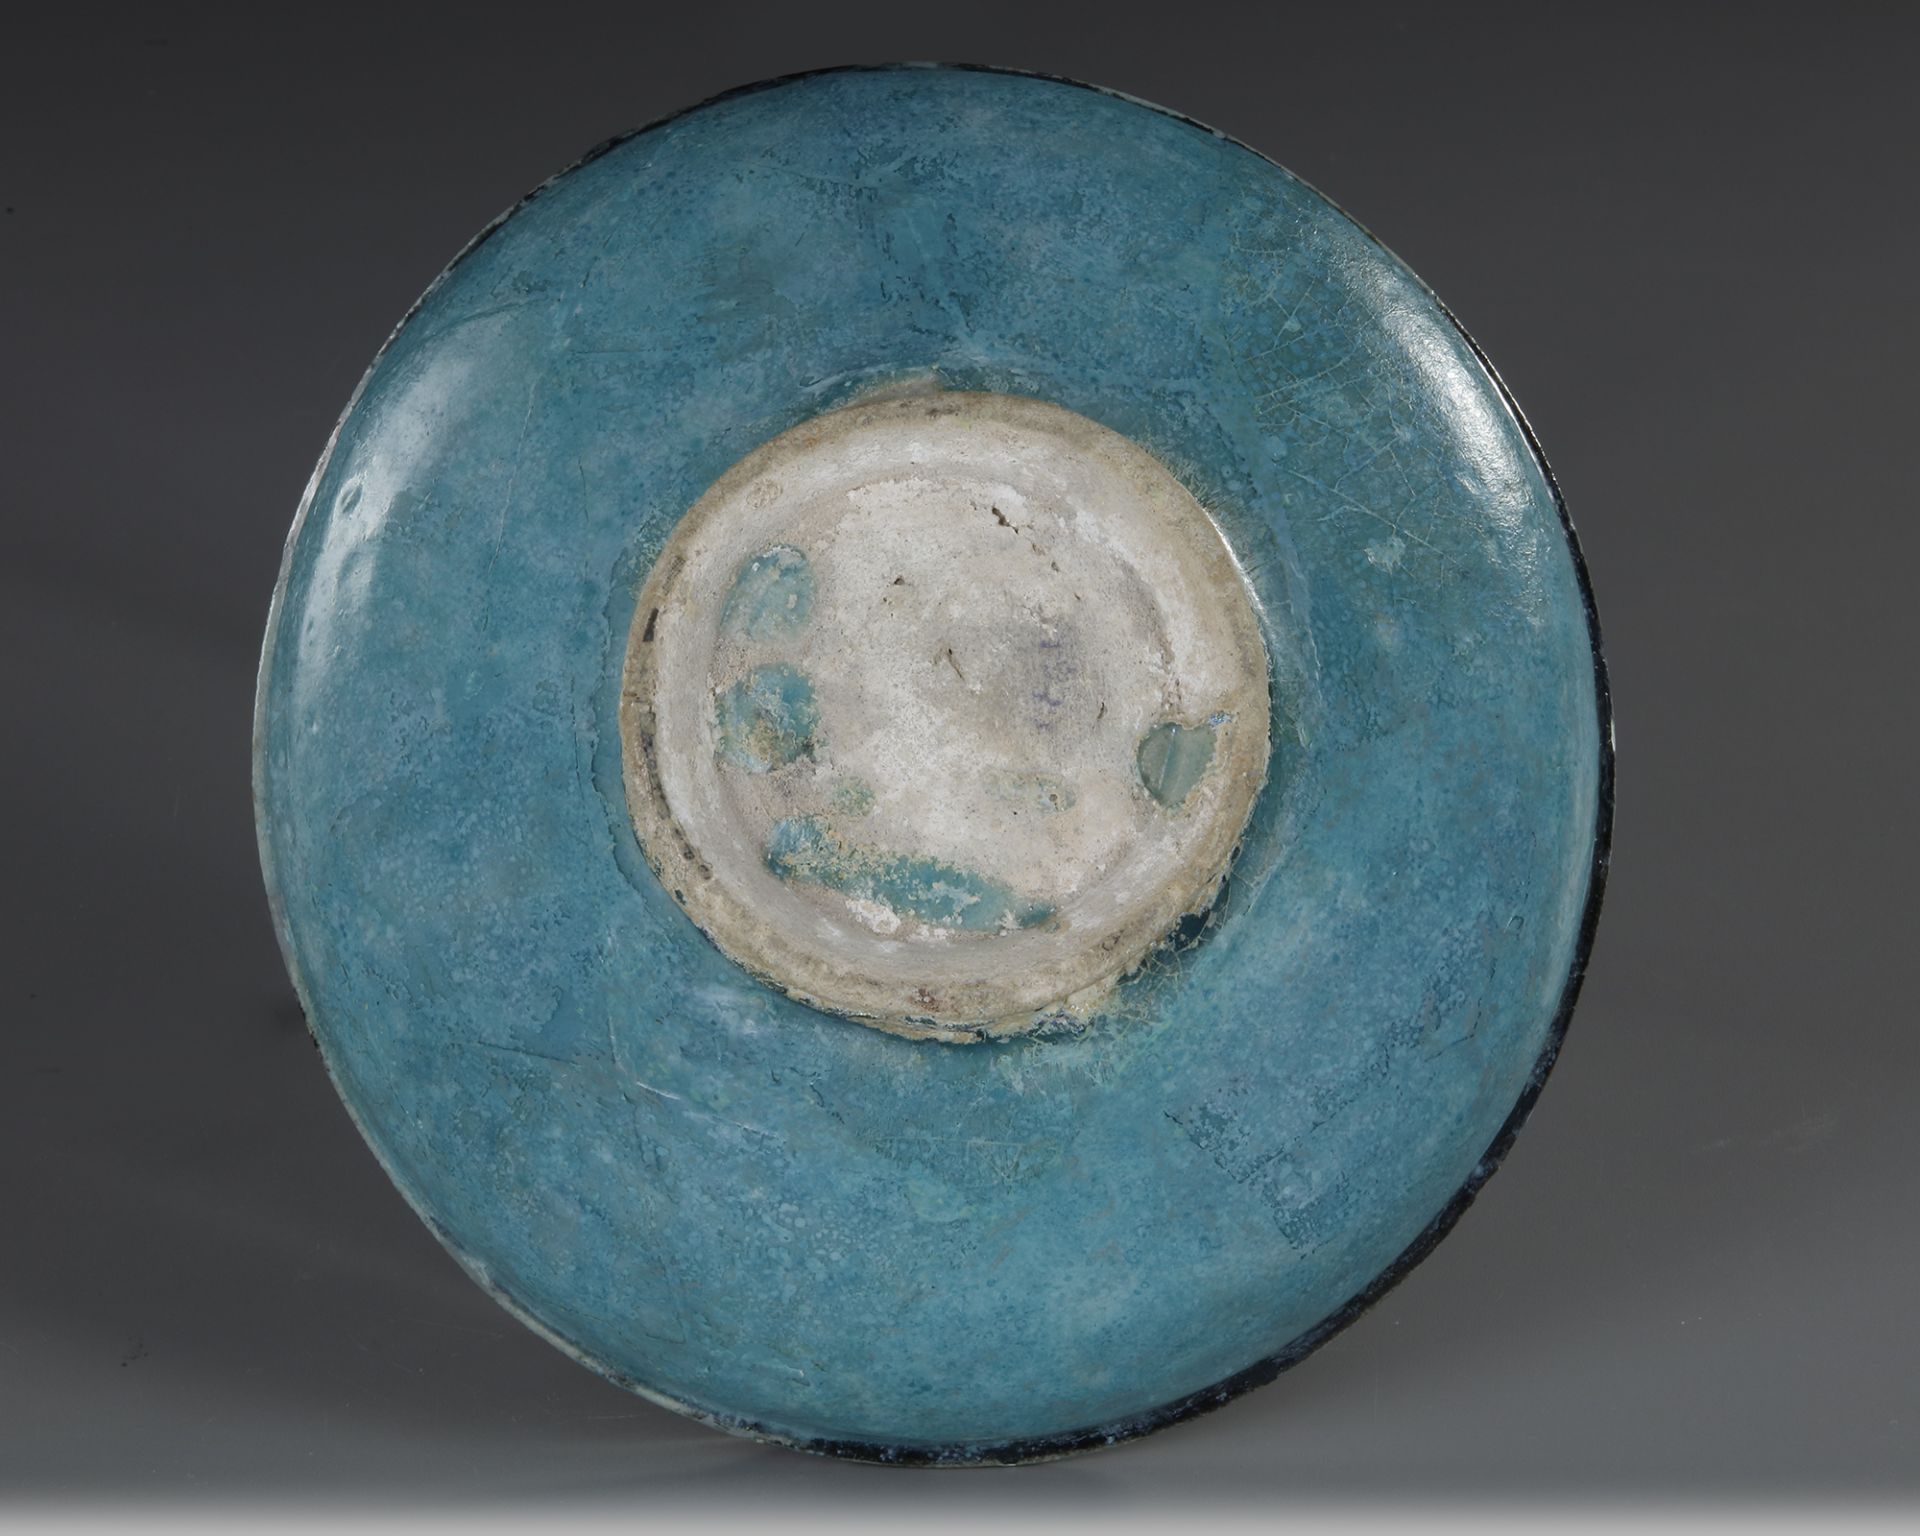 A BLACK AND TURQUOISE GLAZED KASHAN BOWL, PERSIA, 13TH CENTURY - Image 8 of 8